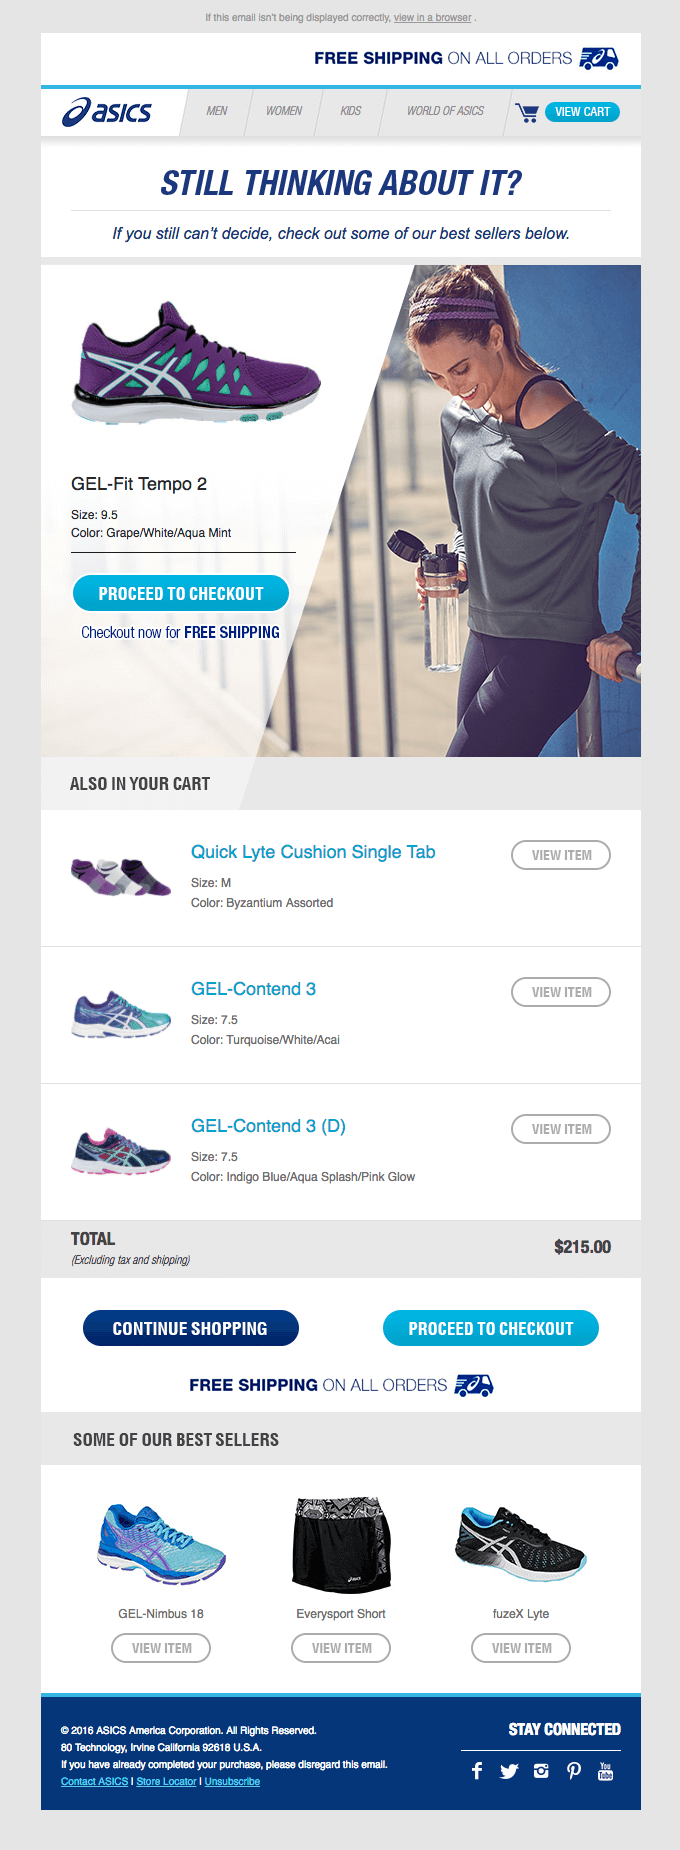 Example of an abandoned cart email from Asics